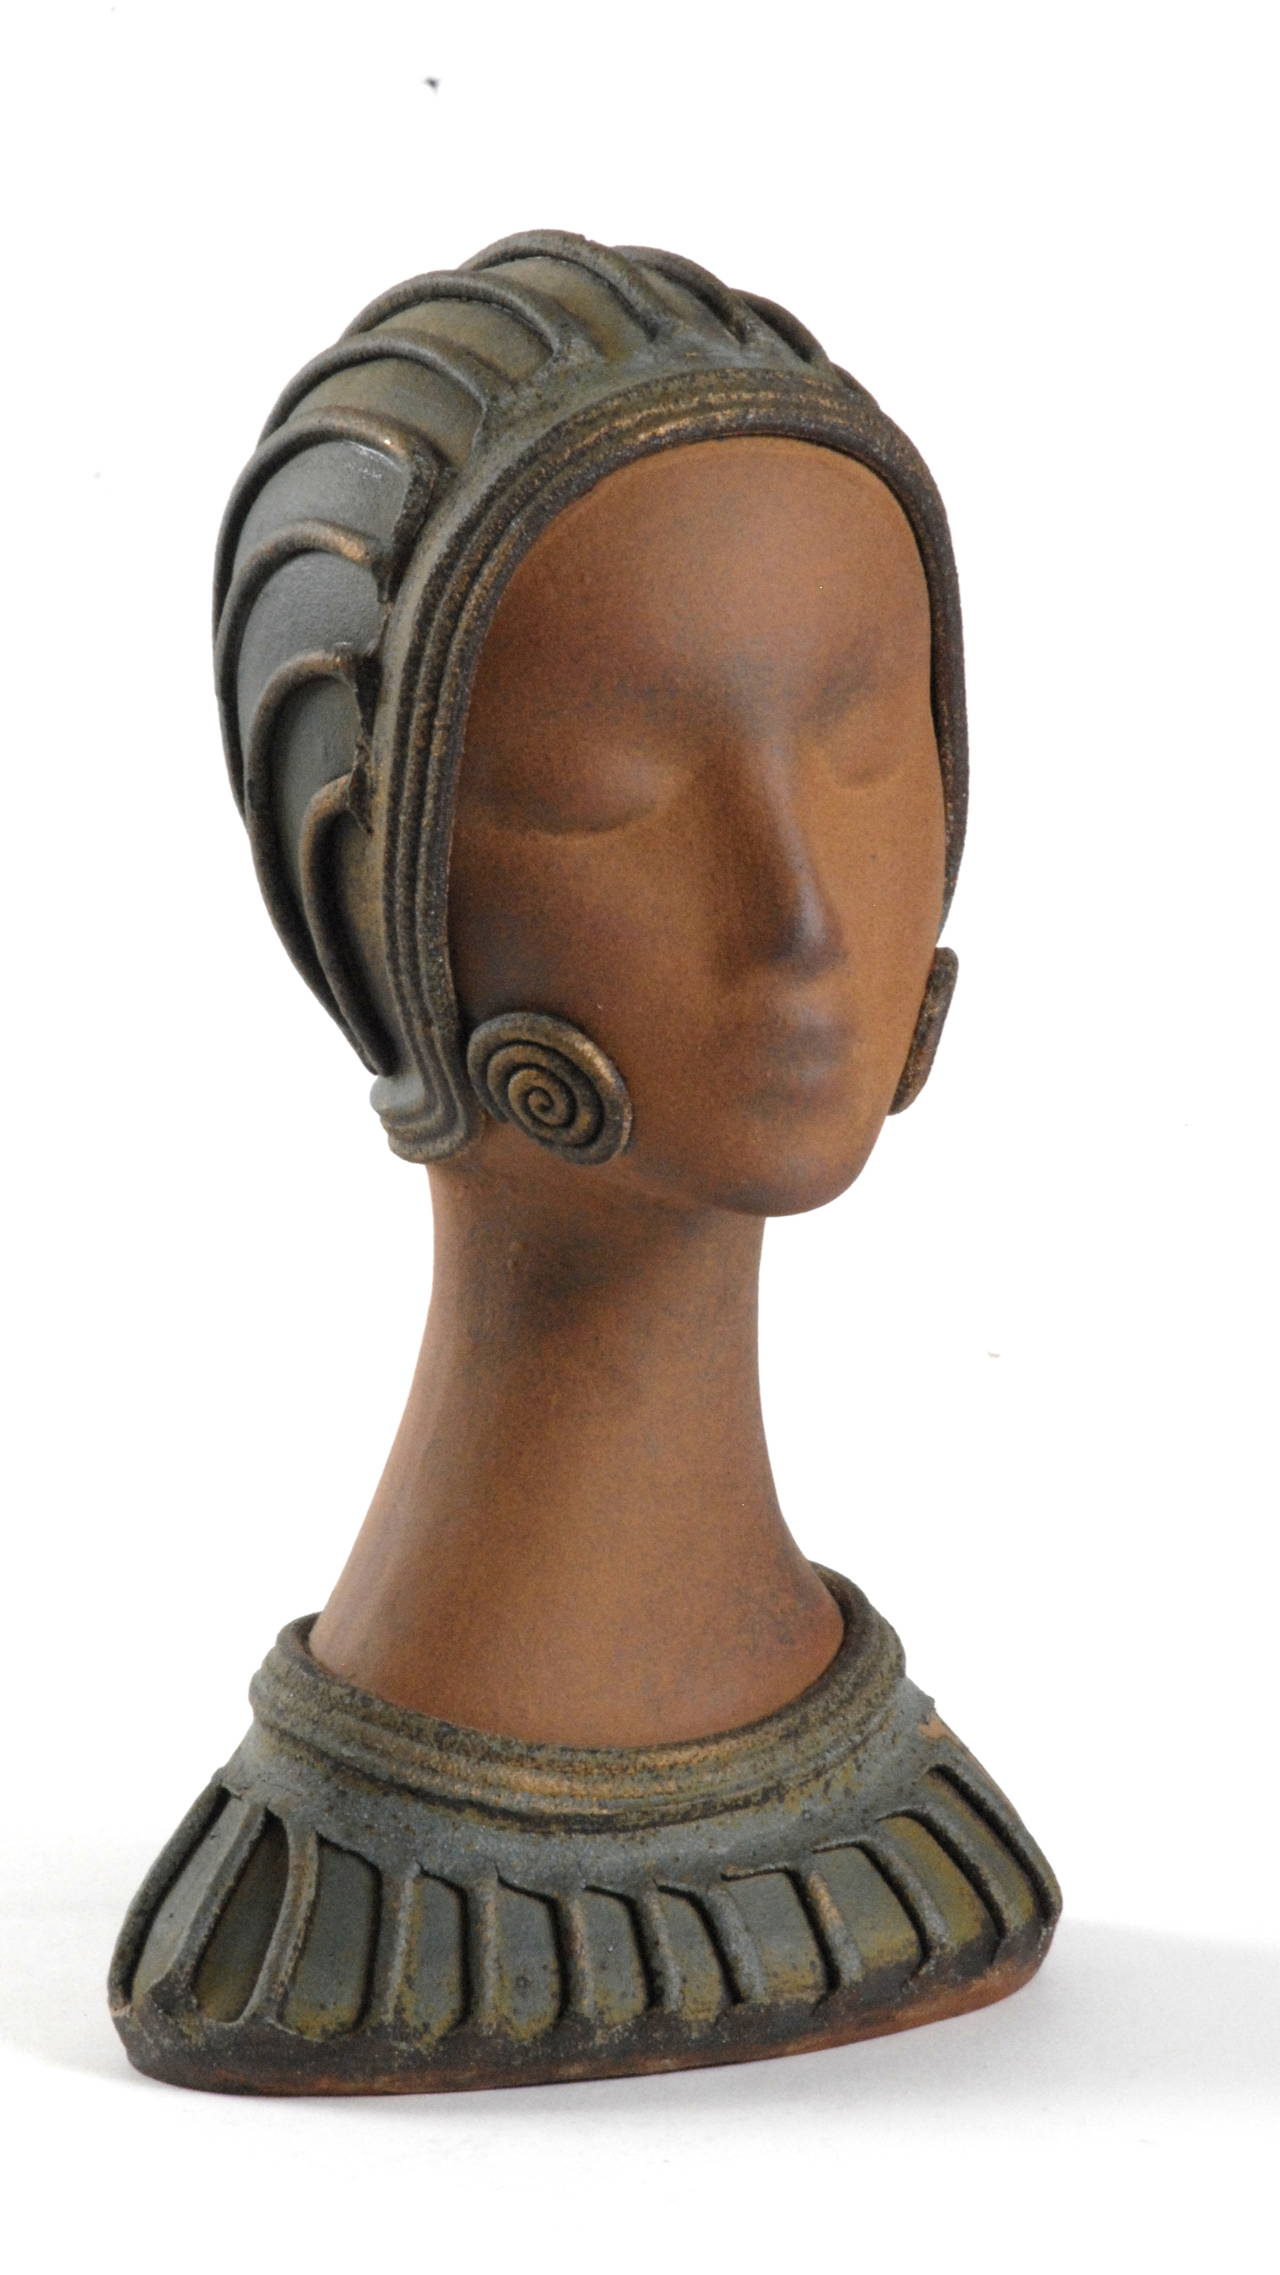 An elegant Art Deco style female head, probably dating from the 1950s-1960s.
Made from terracotta it is finely detailed and conveys a serene and stylish young female.
Applied ribbing for the hat and around the shoulders and by the bottom of the